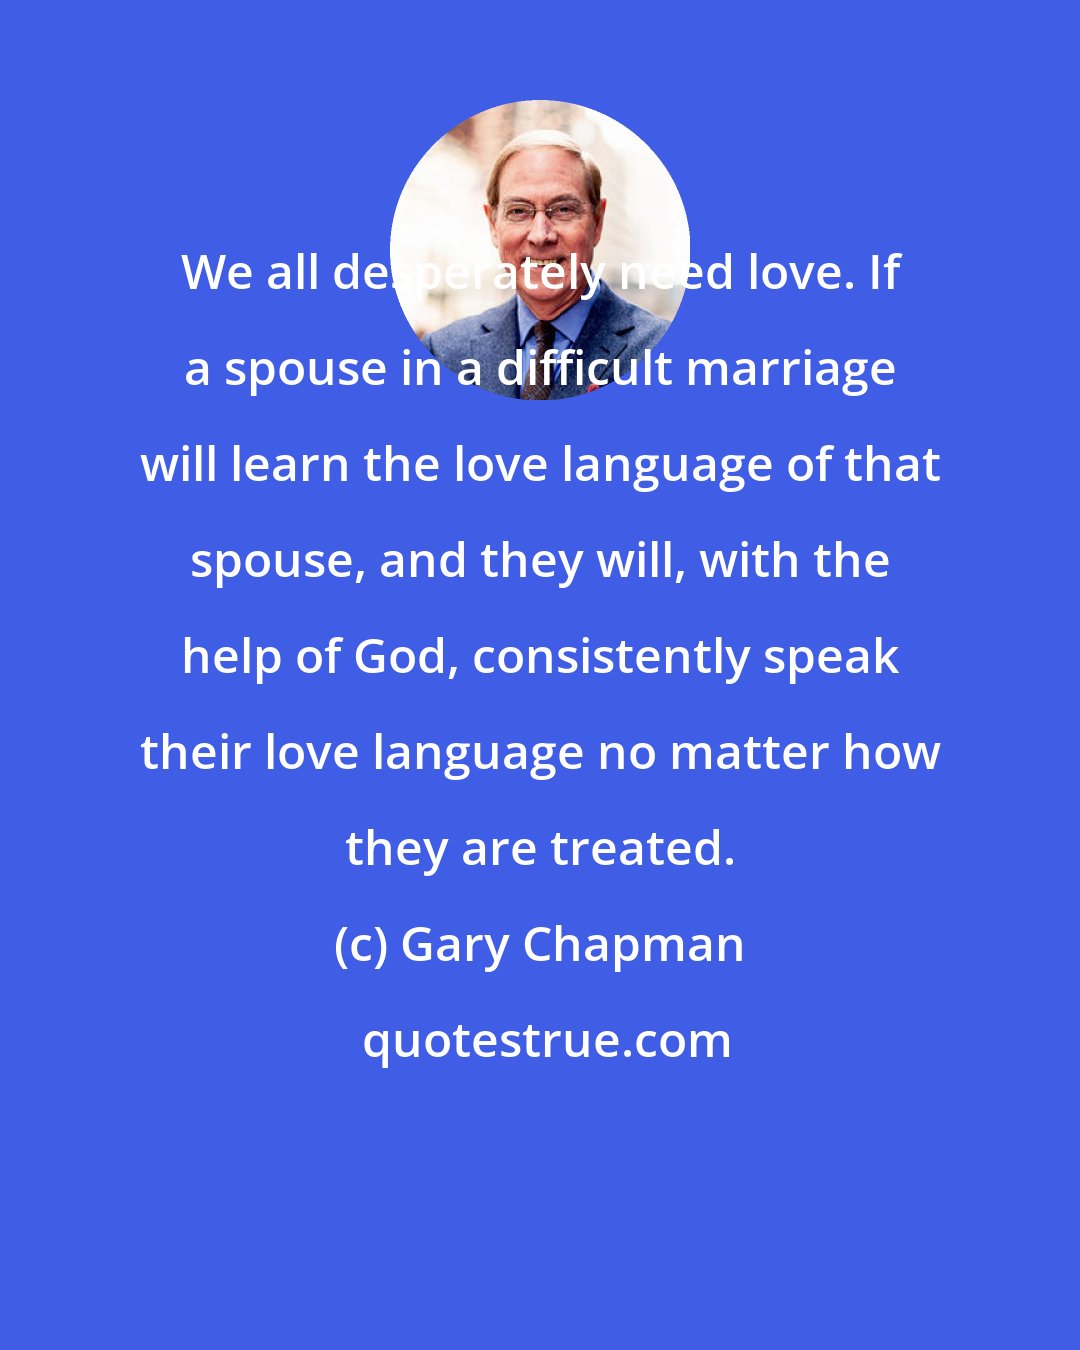 Gary Chapman: We all desperately need love. If a spouse in a difficult marriage will learn the love language of that spouse, and they will, with the help of God, consistently speak their love language no matter how they are treated.